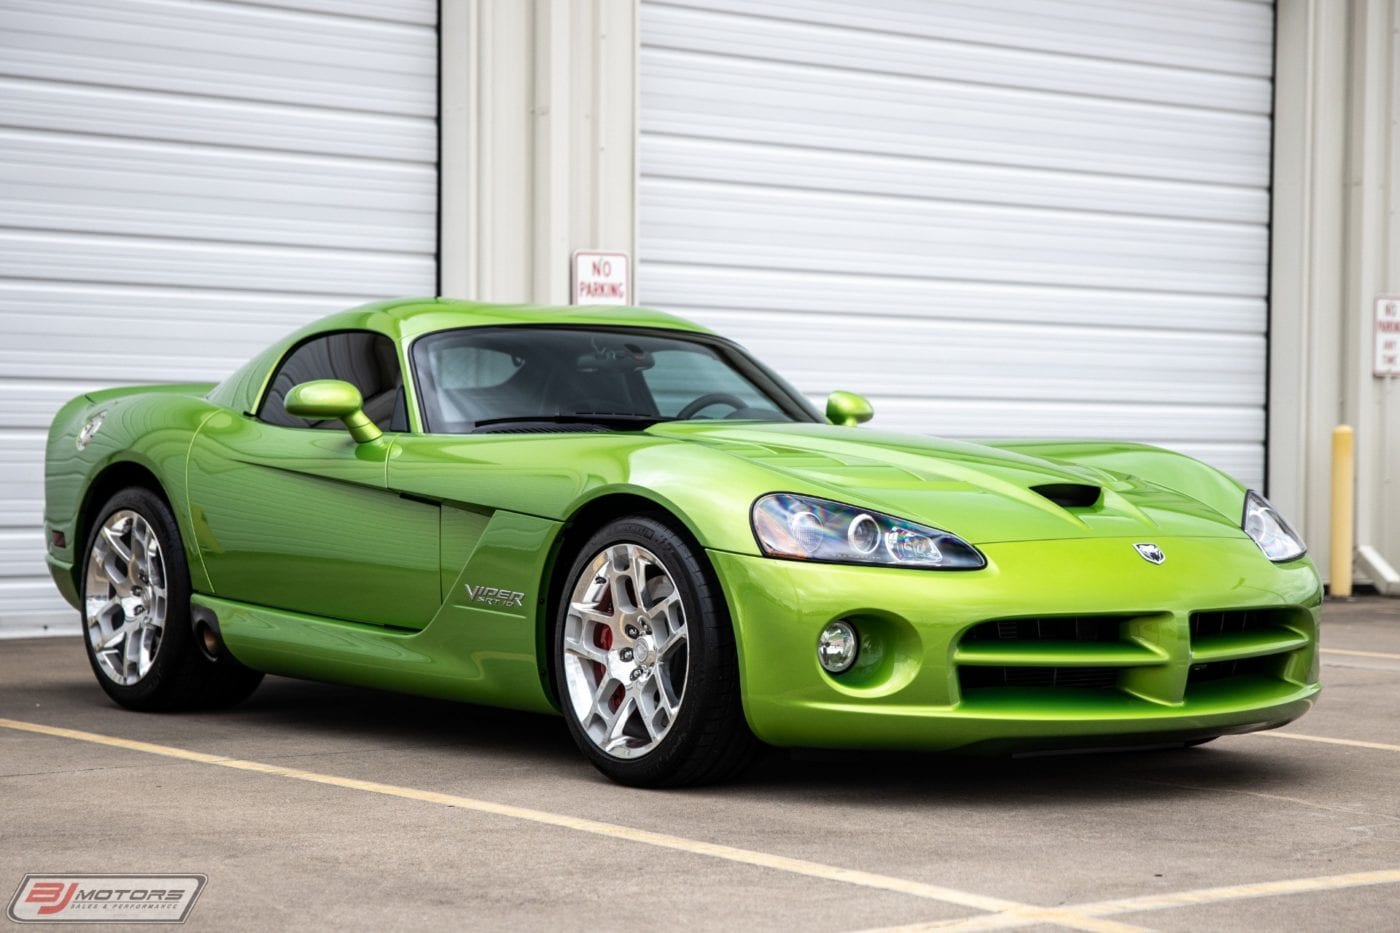 The Best Dodge Vipers You Can Buy Today